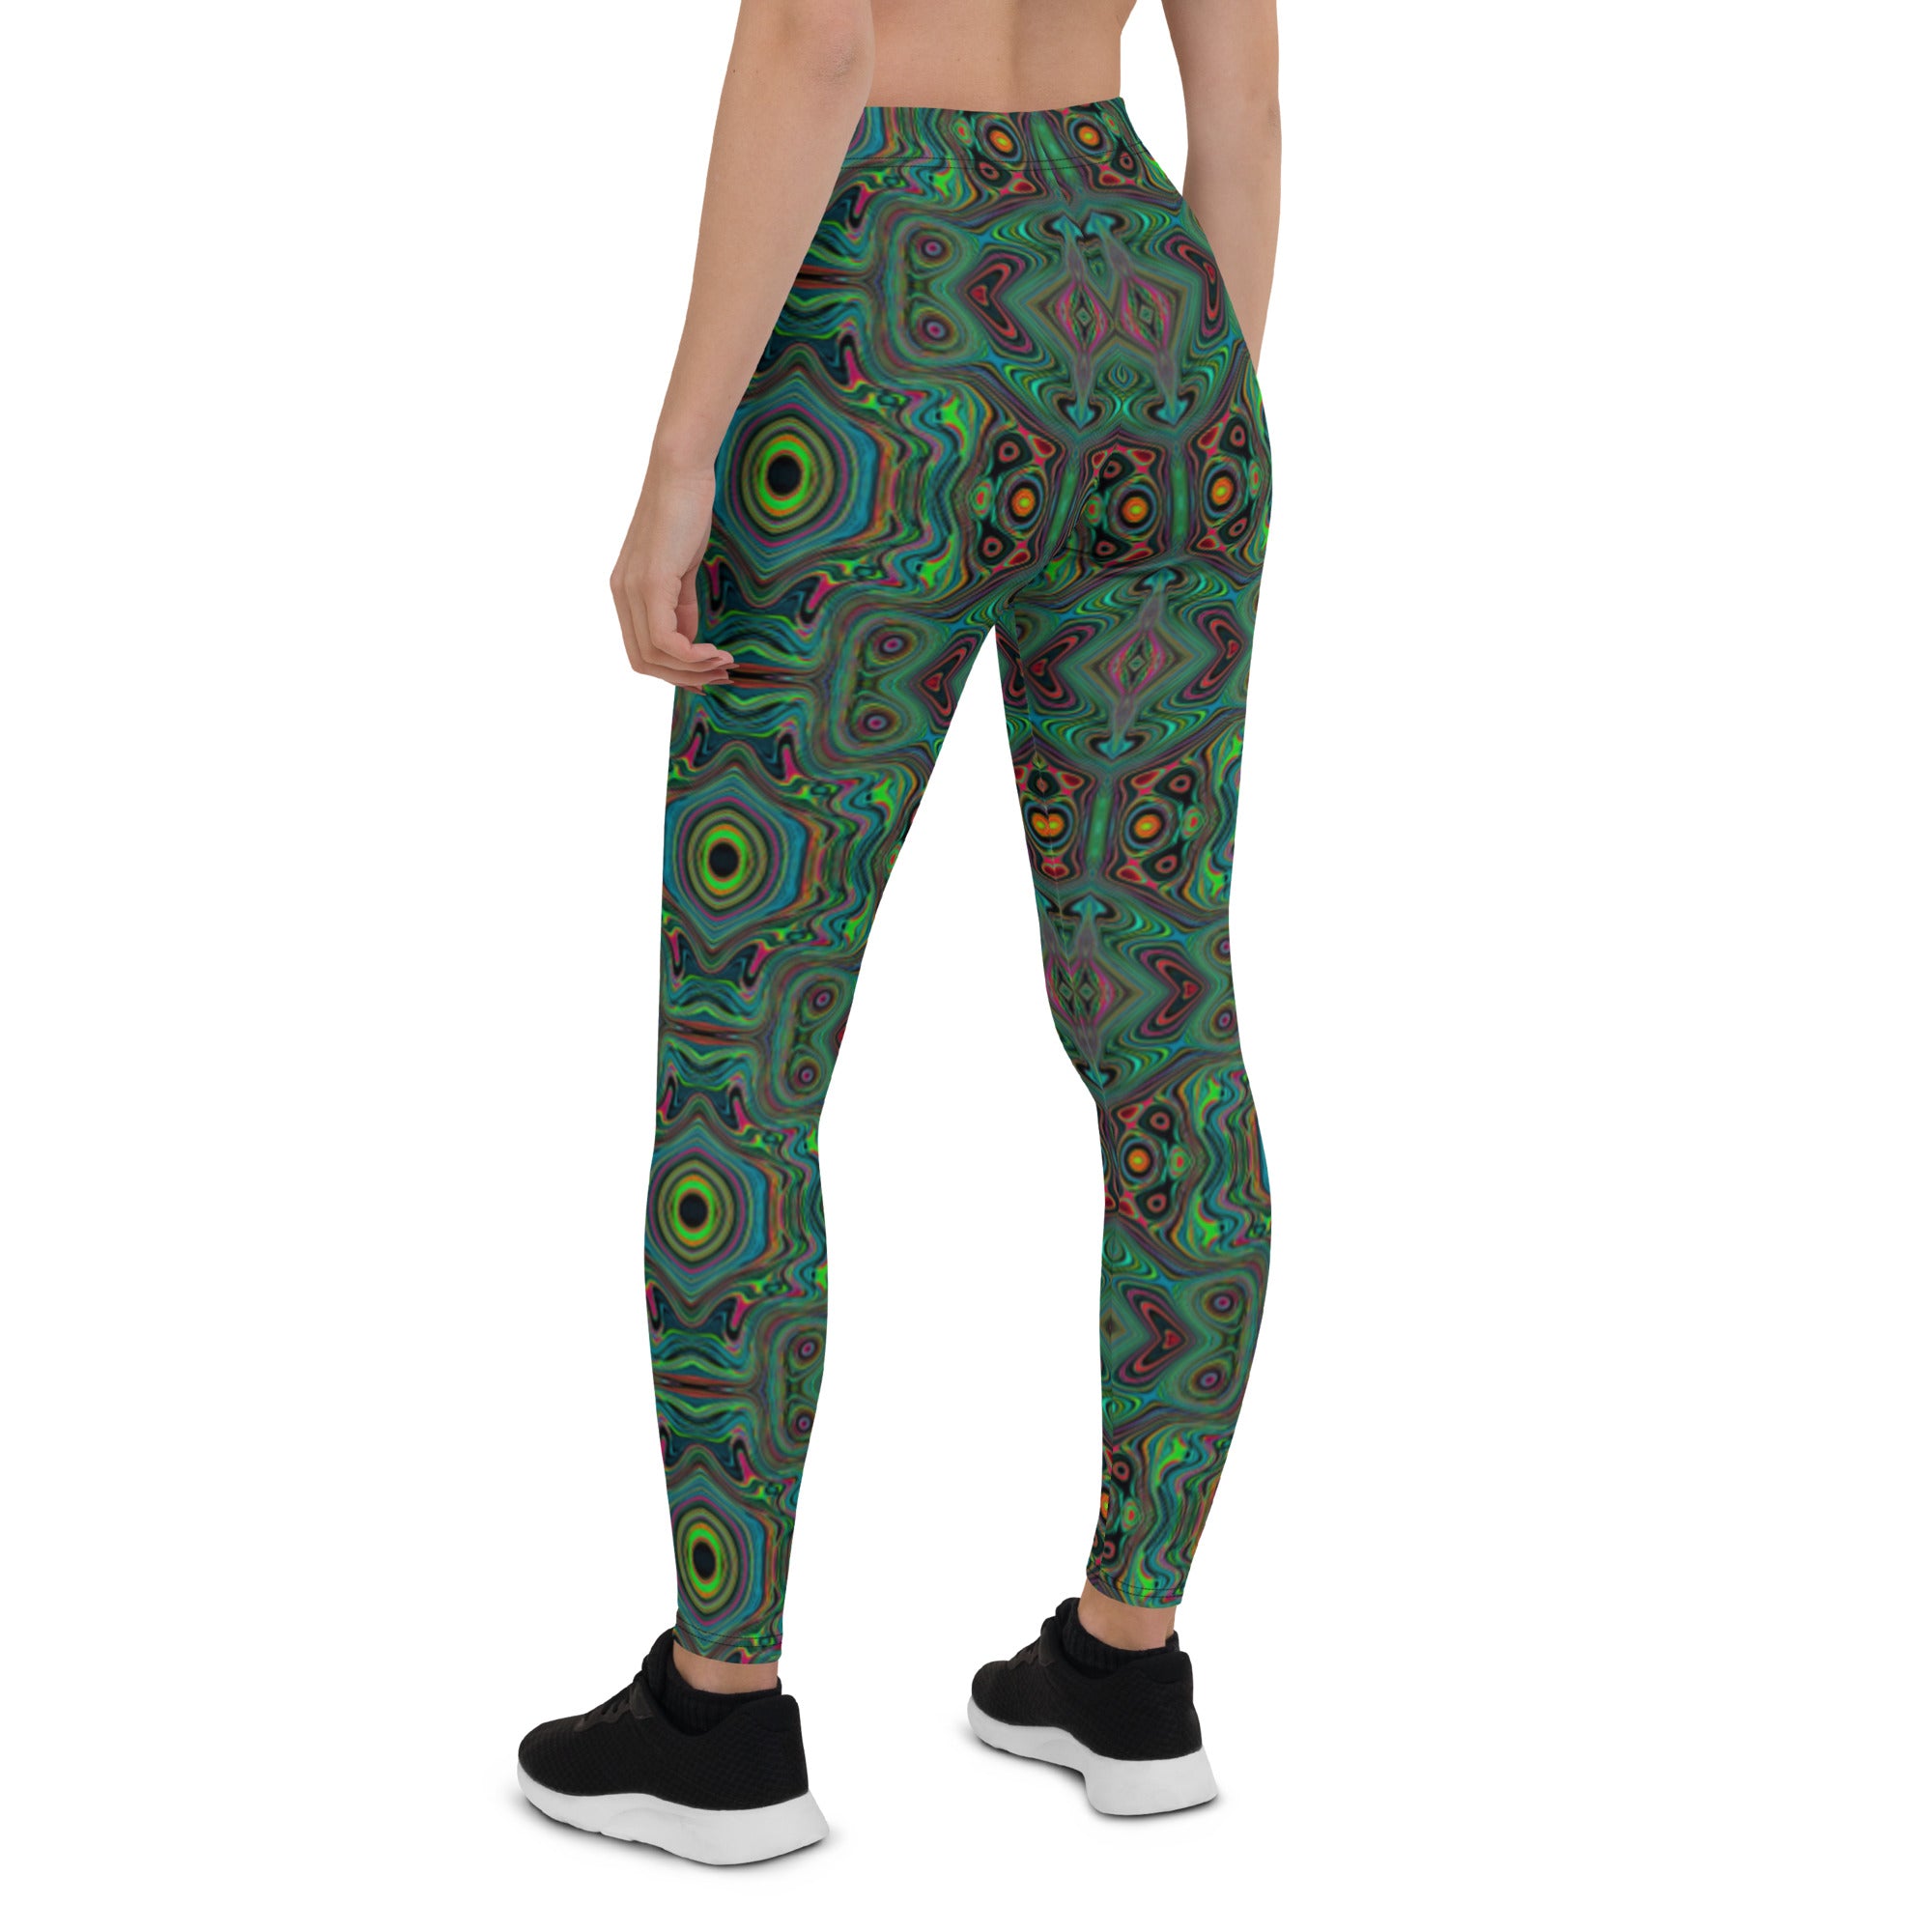 Leggings for Women, Trippy Retro Black and Lime Green Abstract Pattern